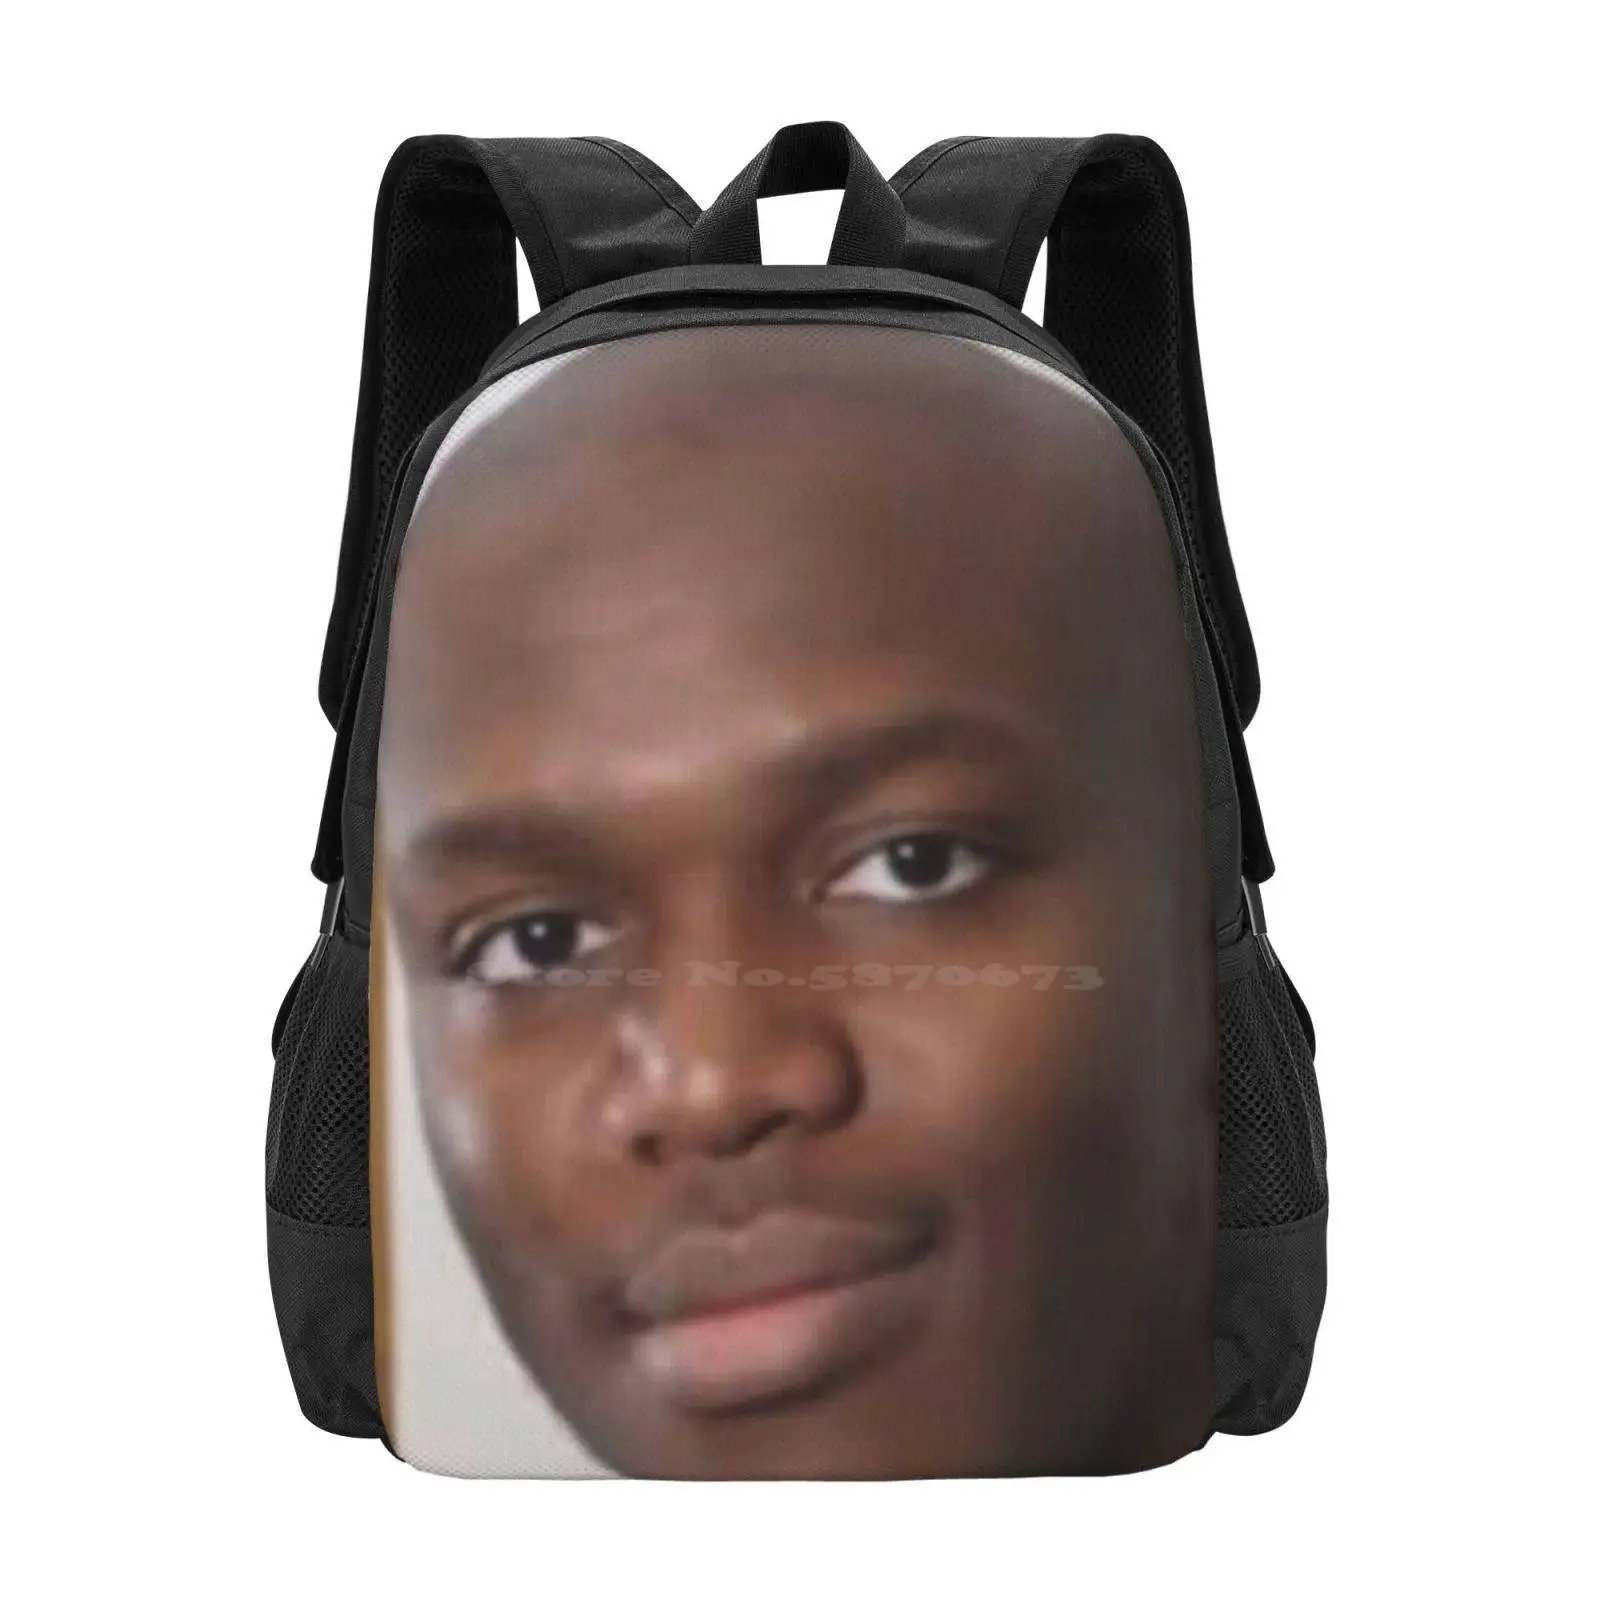 

Ksi Large Face Backpack For Student School Laptop Travel Bag Ksi Vibes Youtuber Funny Try Not To Laugh Cursed Portrai Memes